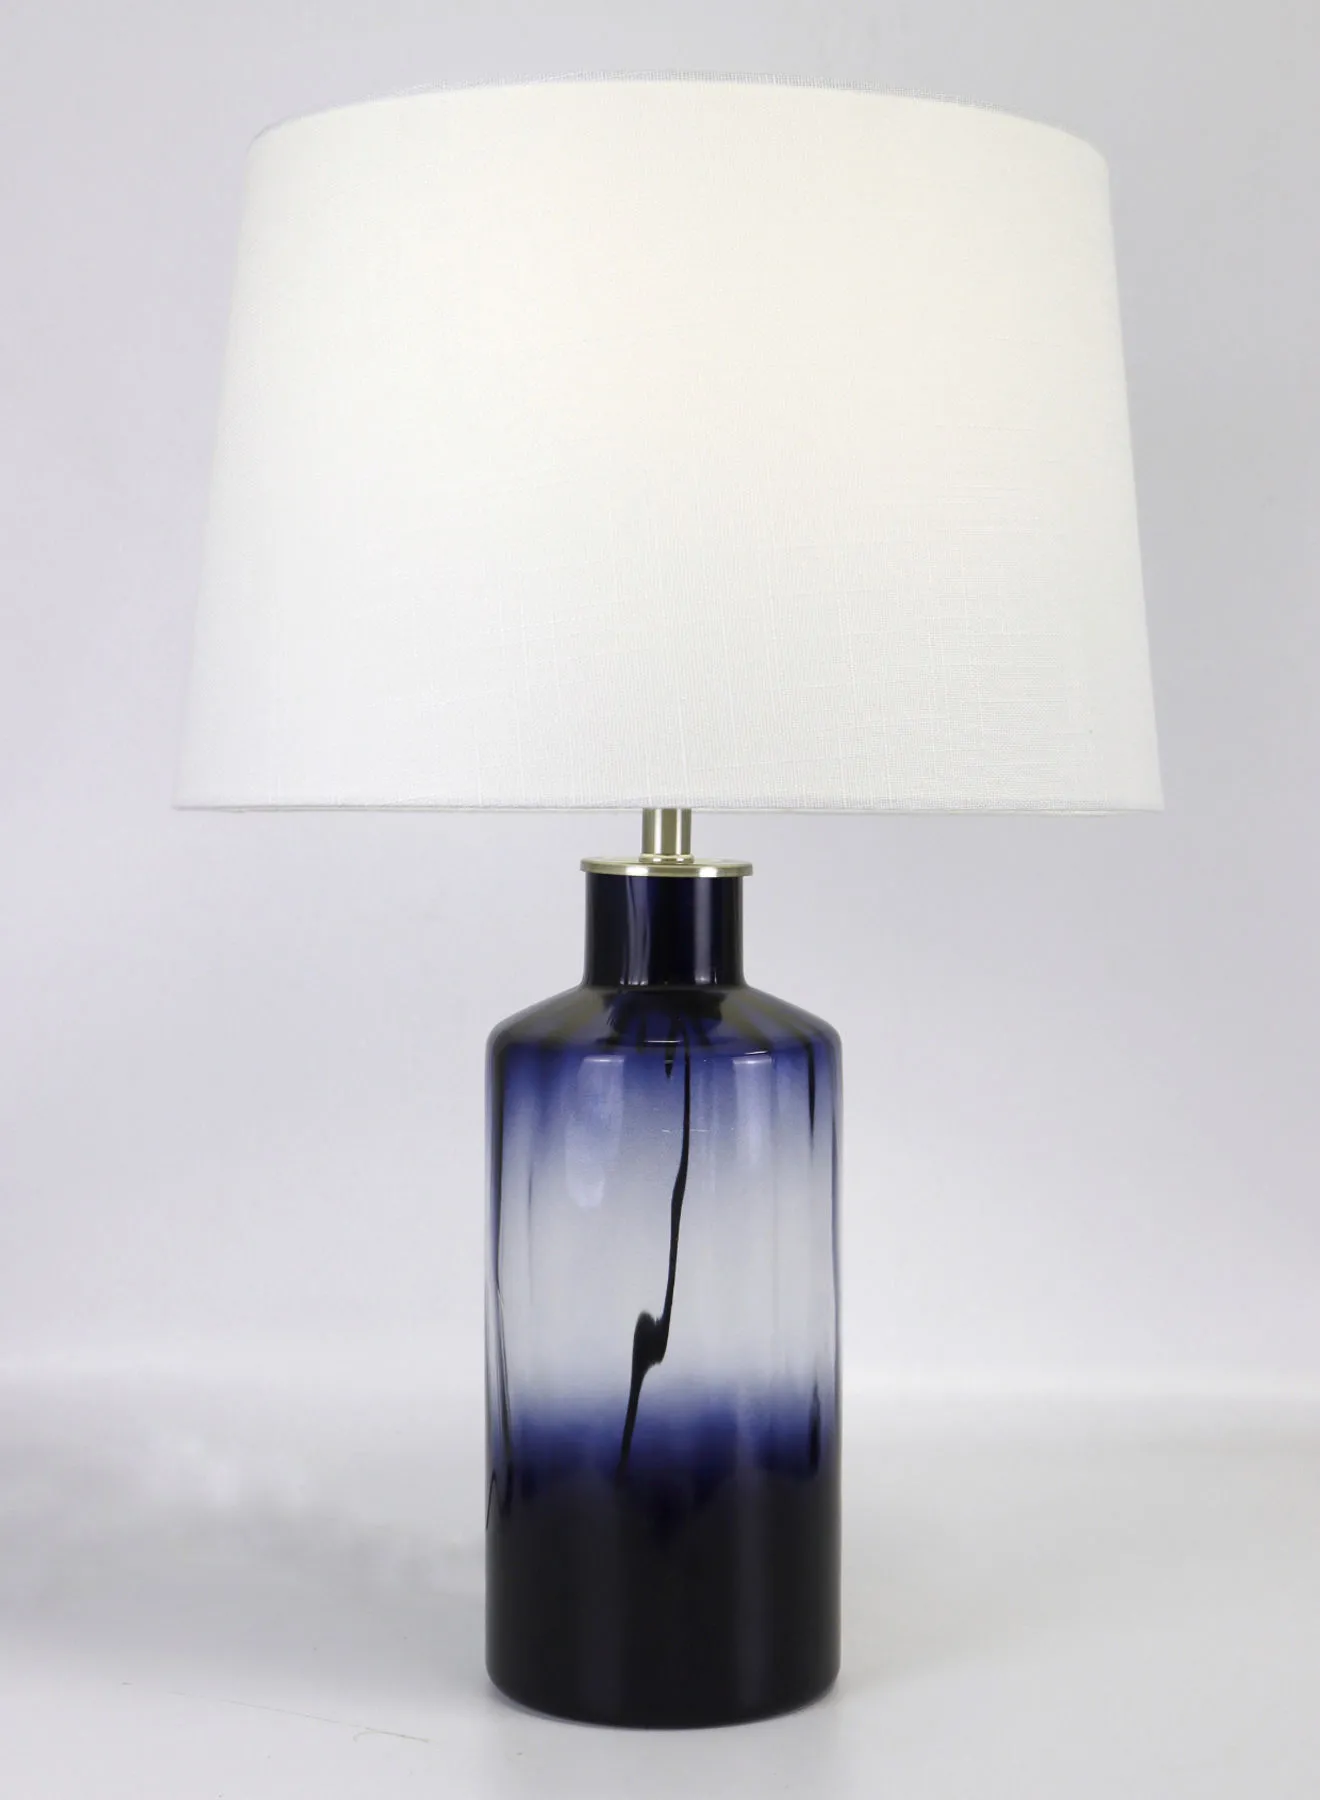 ebb & flow Modern Design Glass Table Lamp Unique Luxury Quality Material for the Perfect Stylish Home RSN71037 Blue 15 x 23.2